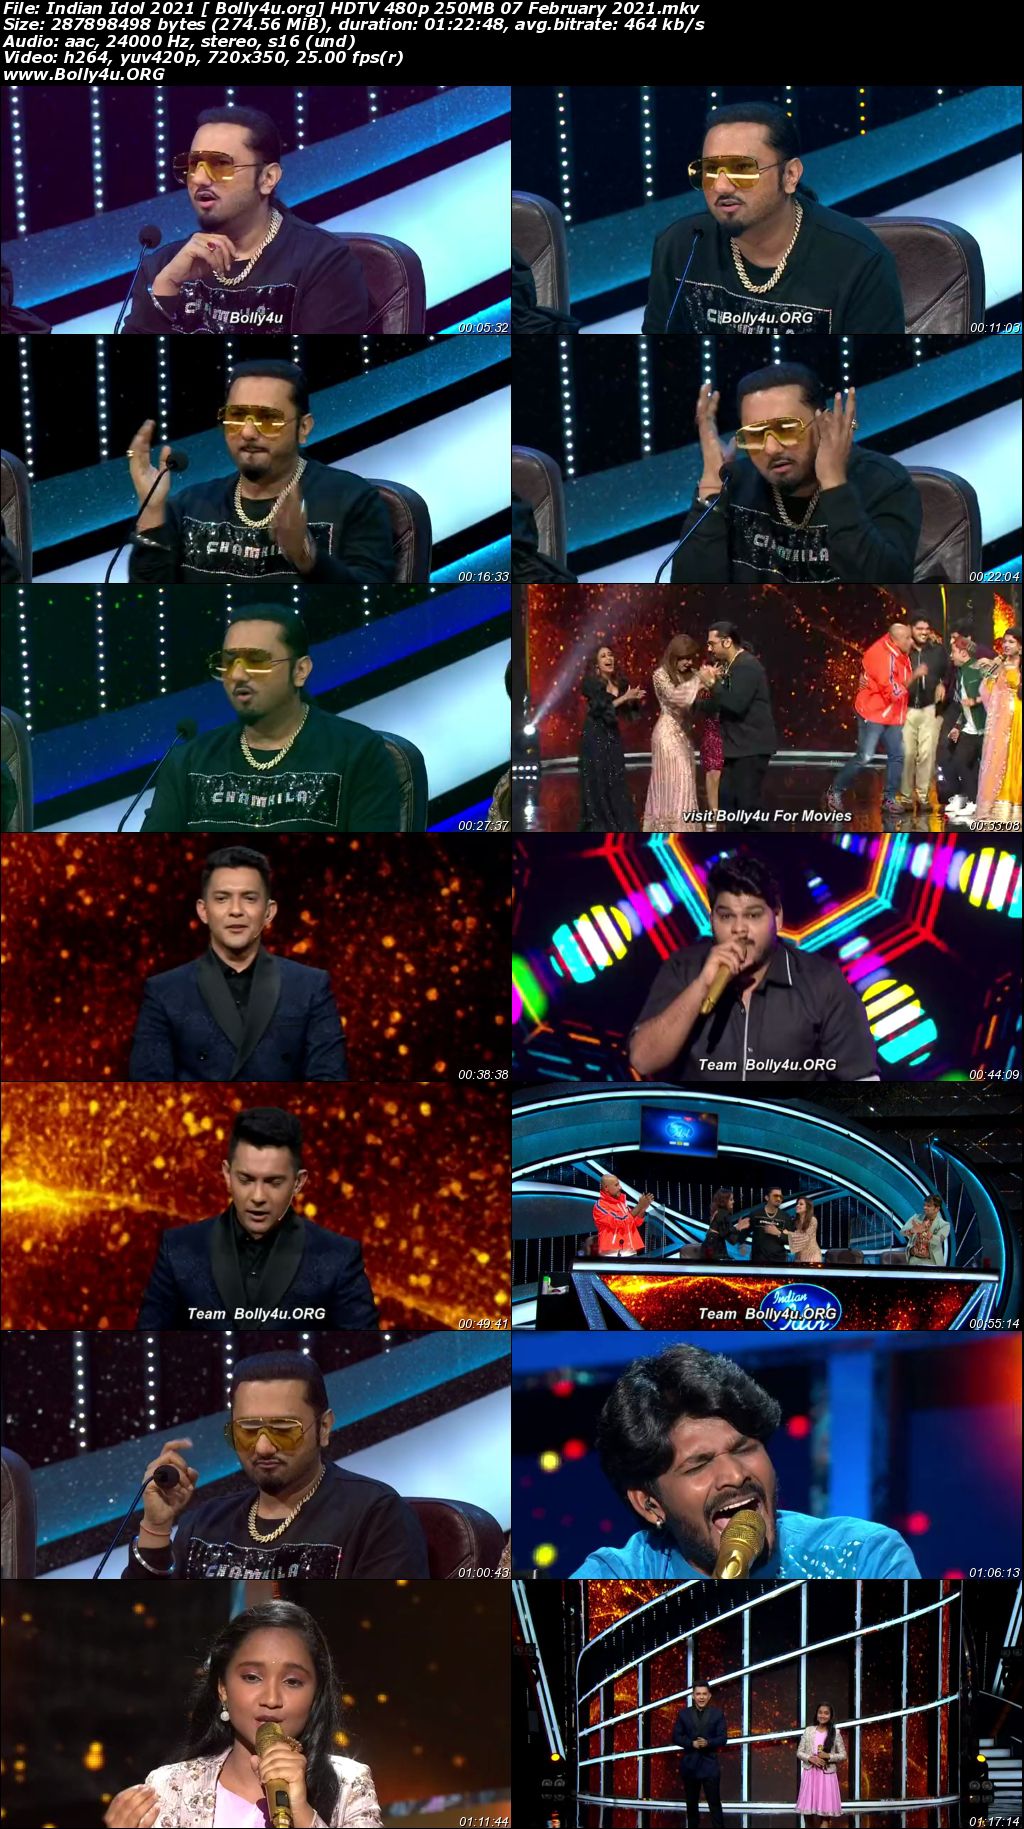 Indian Idol 2021 HDTV 480p 250MB 07 February 2021 Download